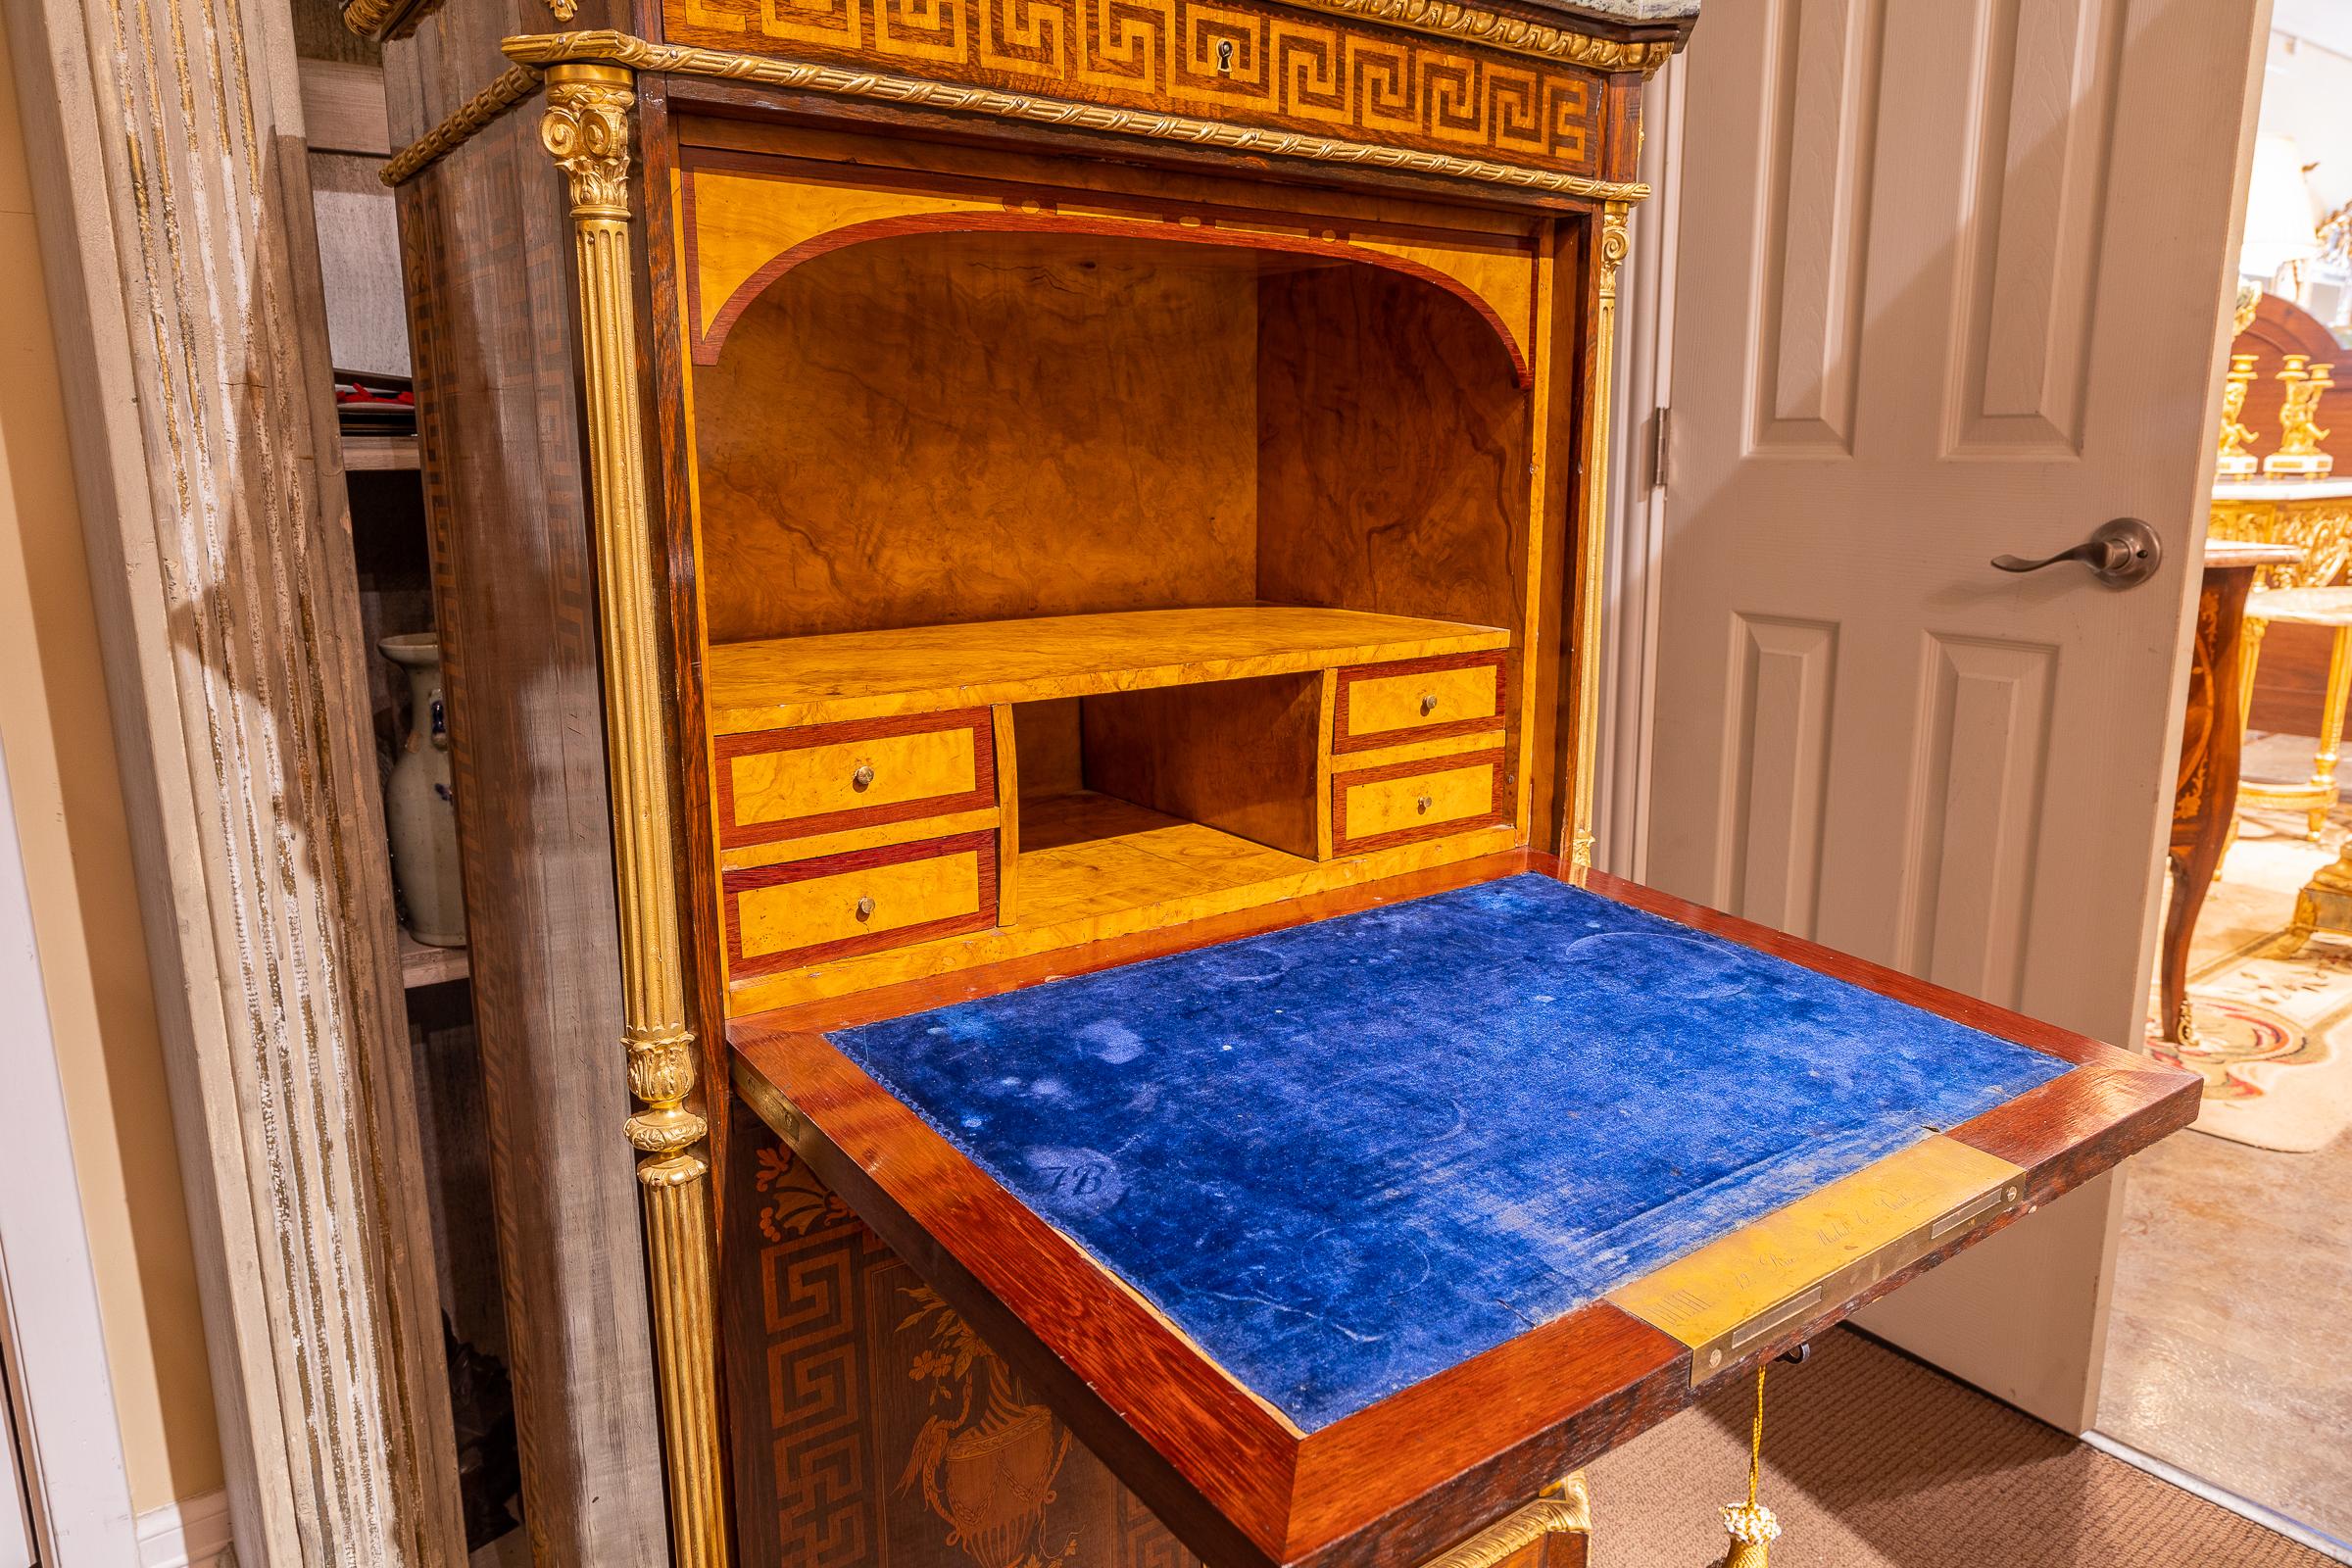 Tulipwood Very Fine 19th Century French Louis XVI Marquetry Secretaire Abattant by Diehl. For Sale